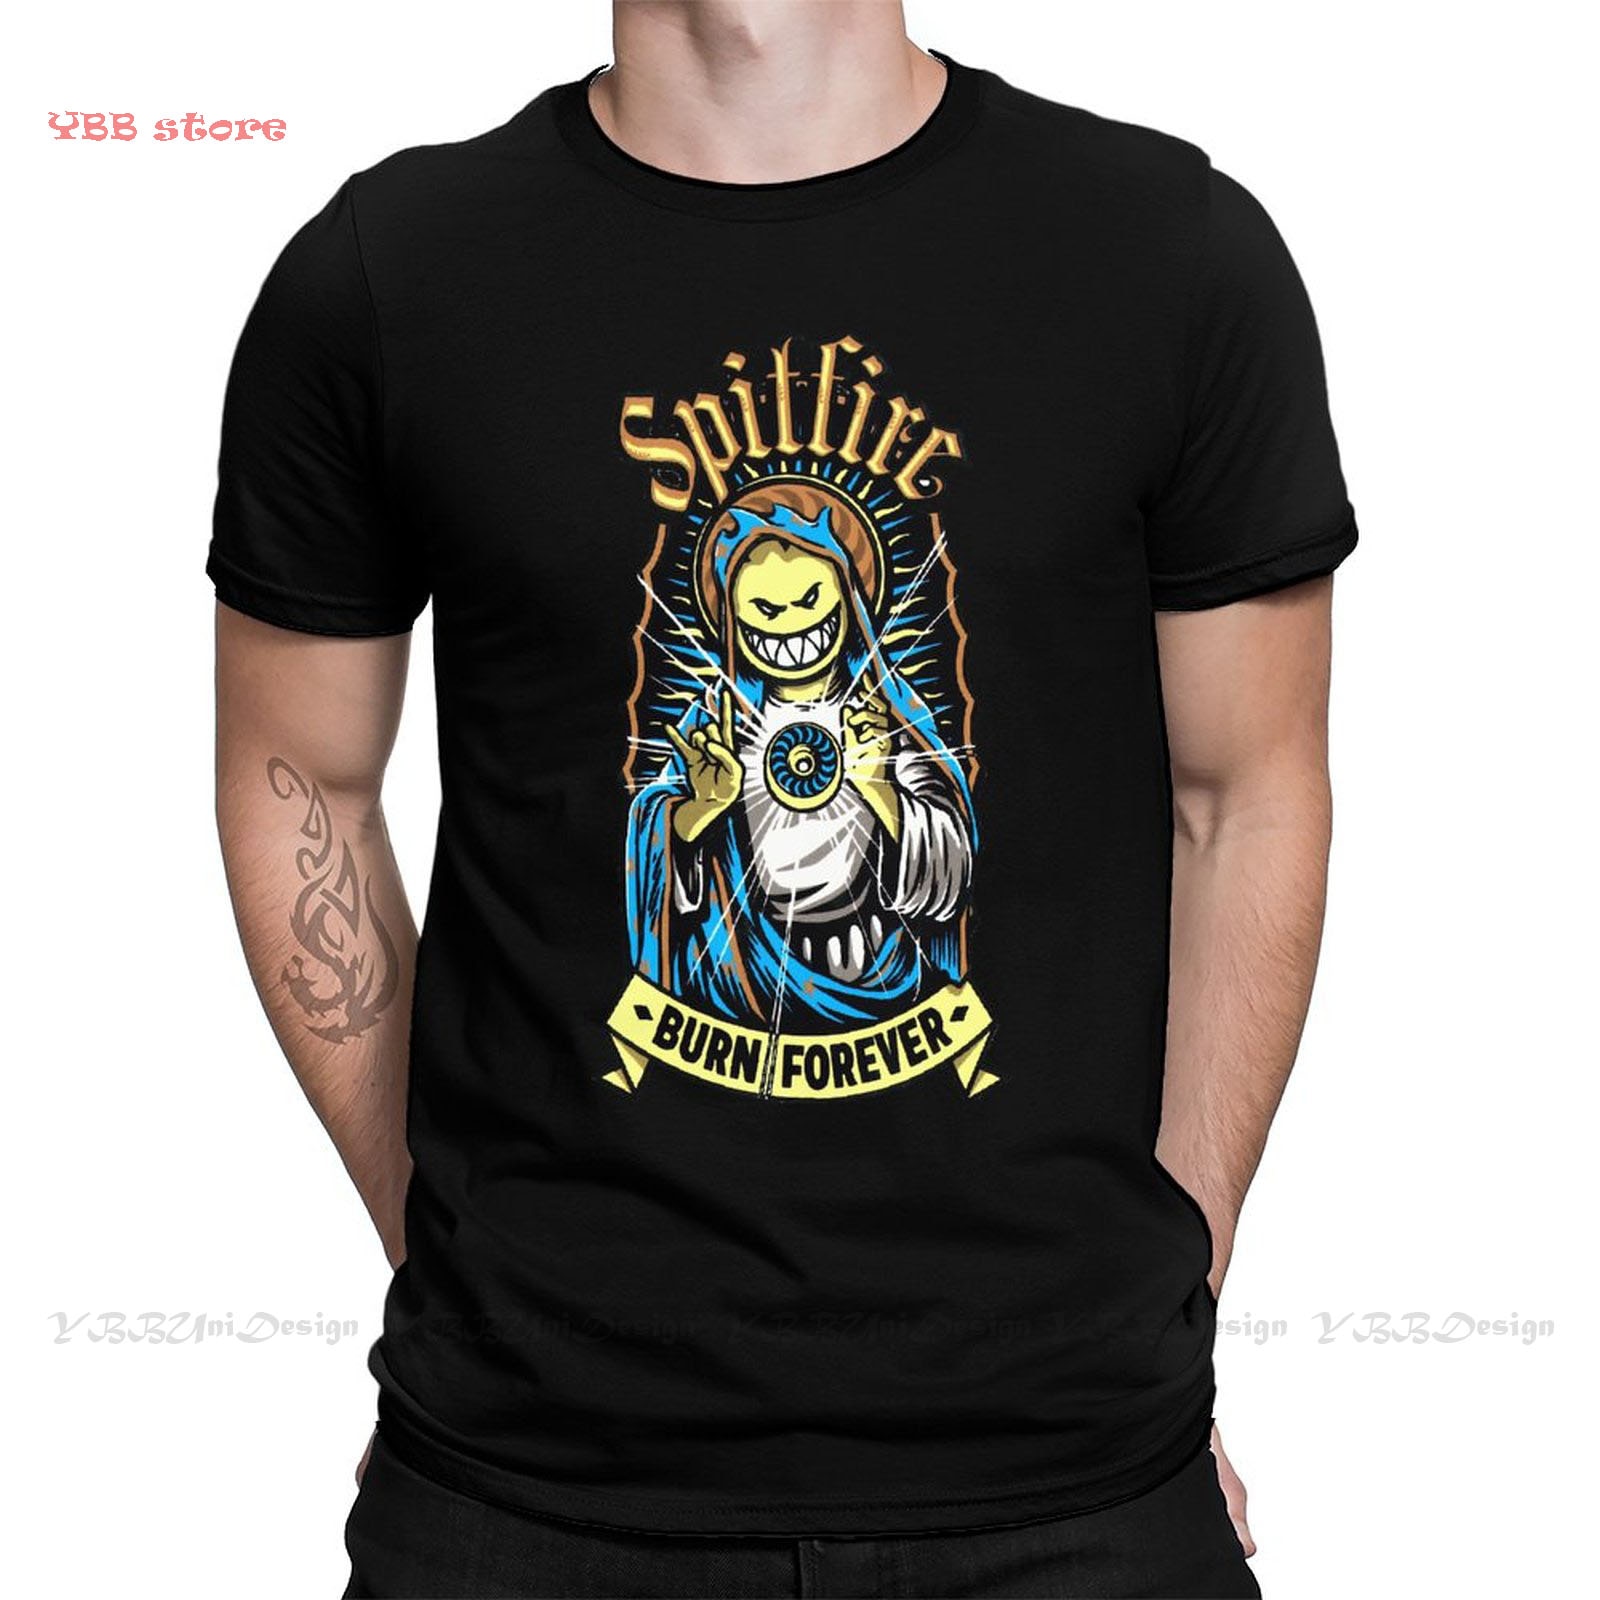 High Quality Men SK8 The Infinity Skate Sports Black T Shirt Spitfire Burn Forever Pure Cotton - SK8 The Infinity Merch